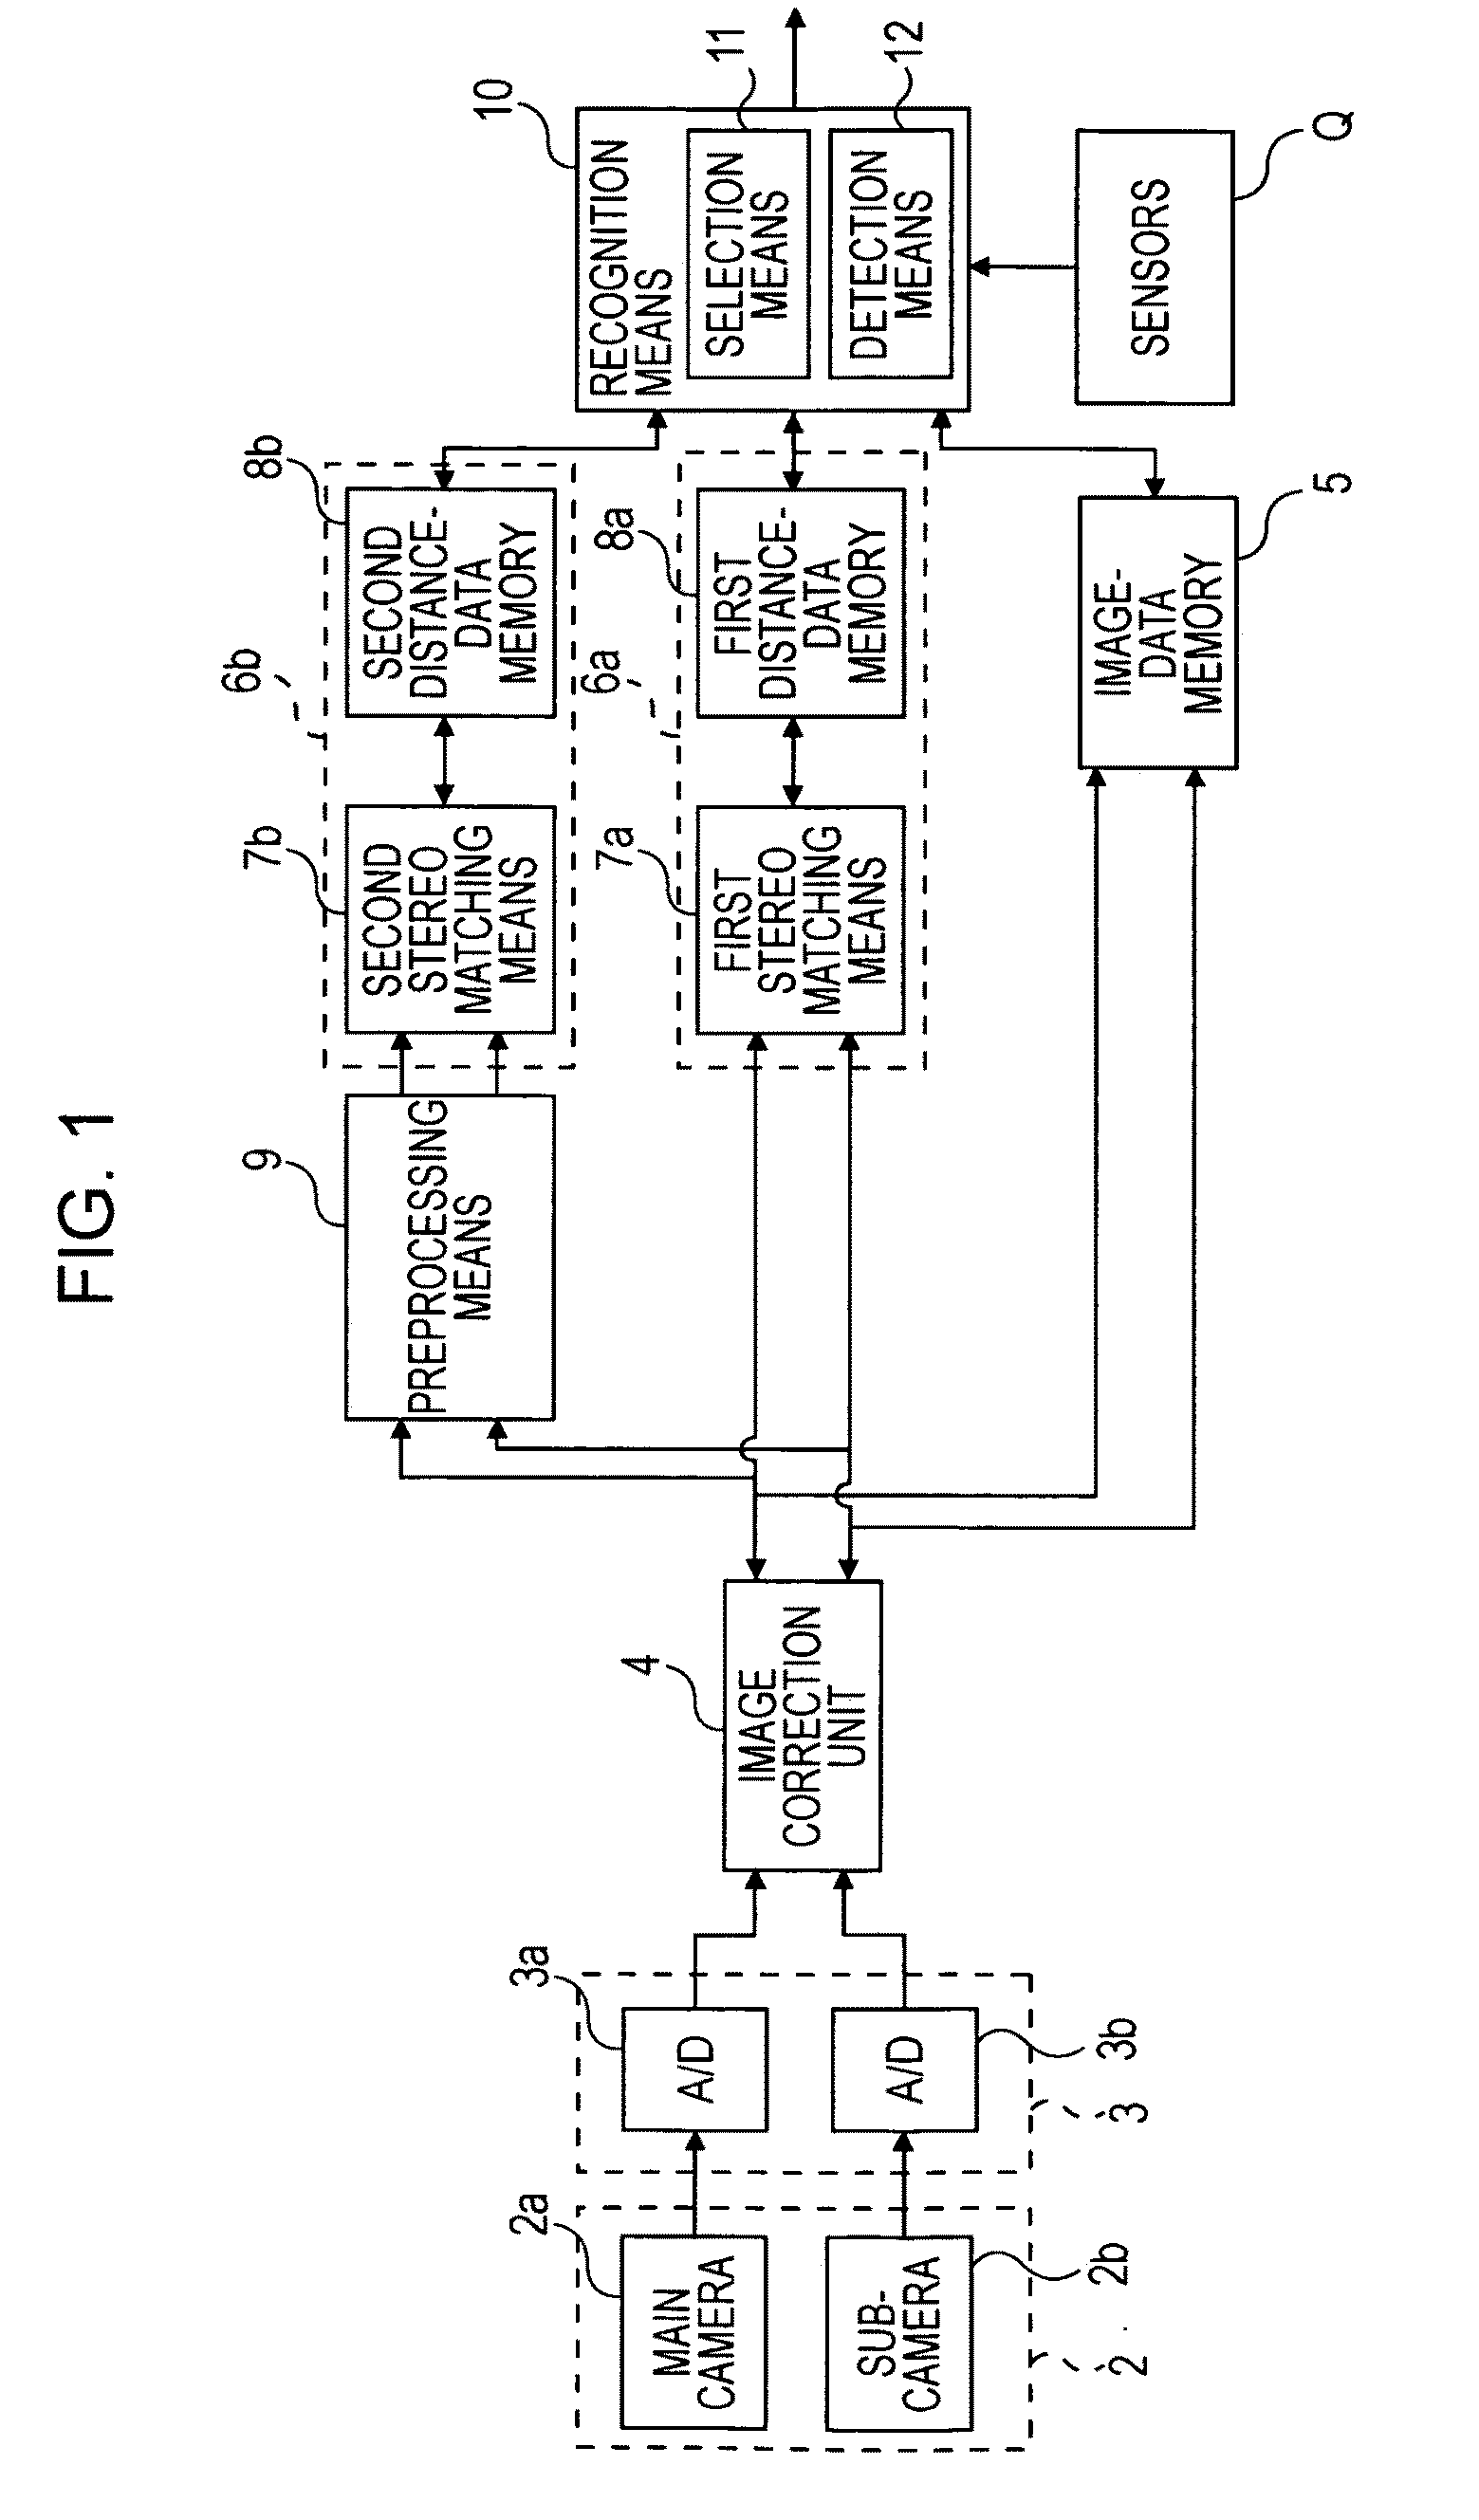 Environment recognition system